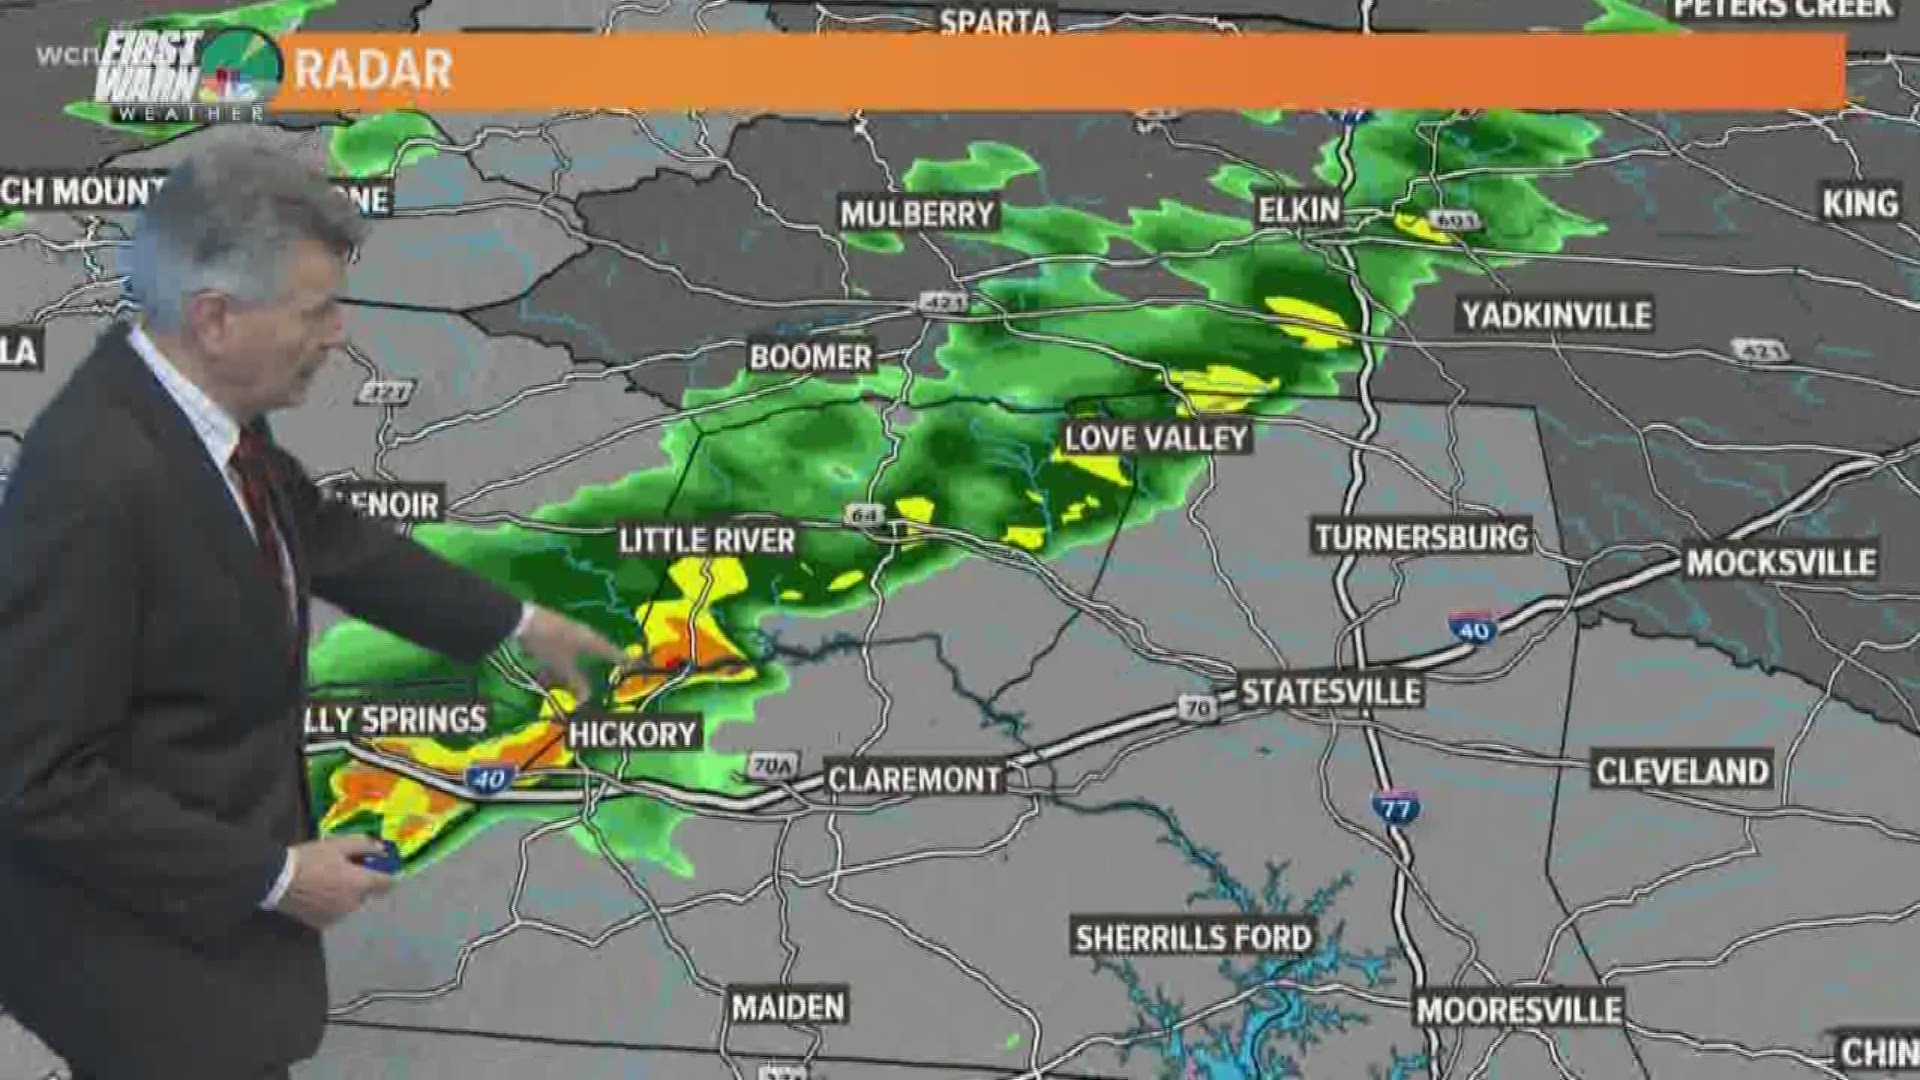 A line of showers and storms is moving across the Charlotte area with a chance of rain Friday afternoon with gusty winds.